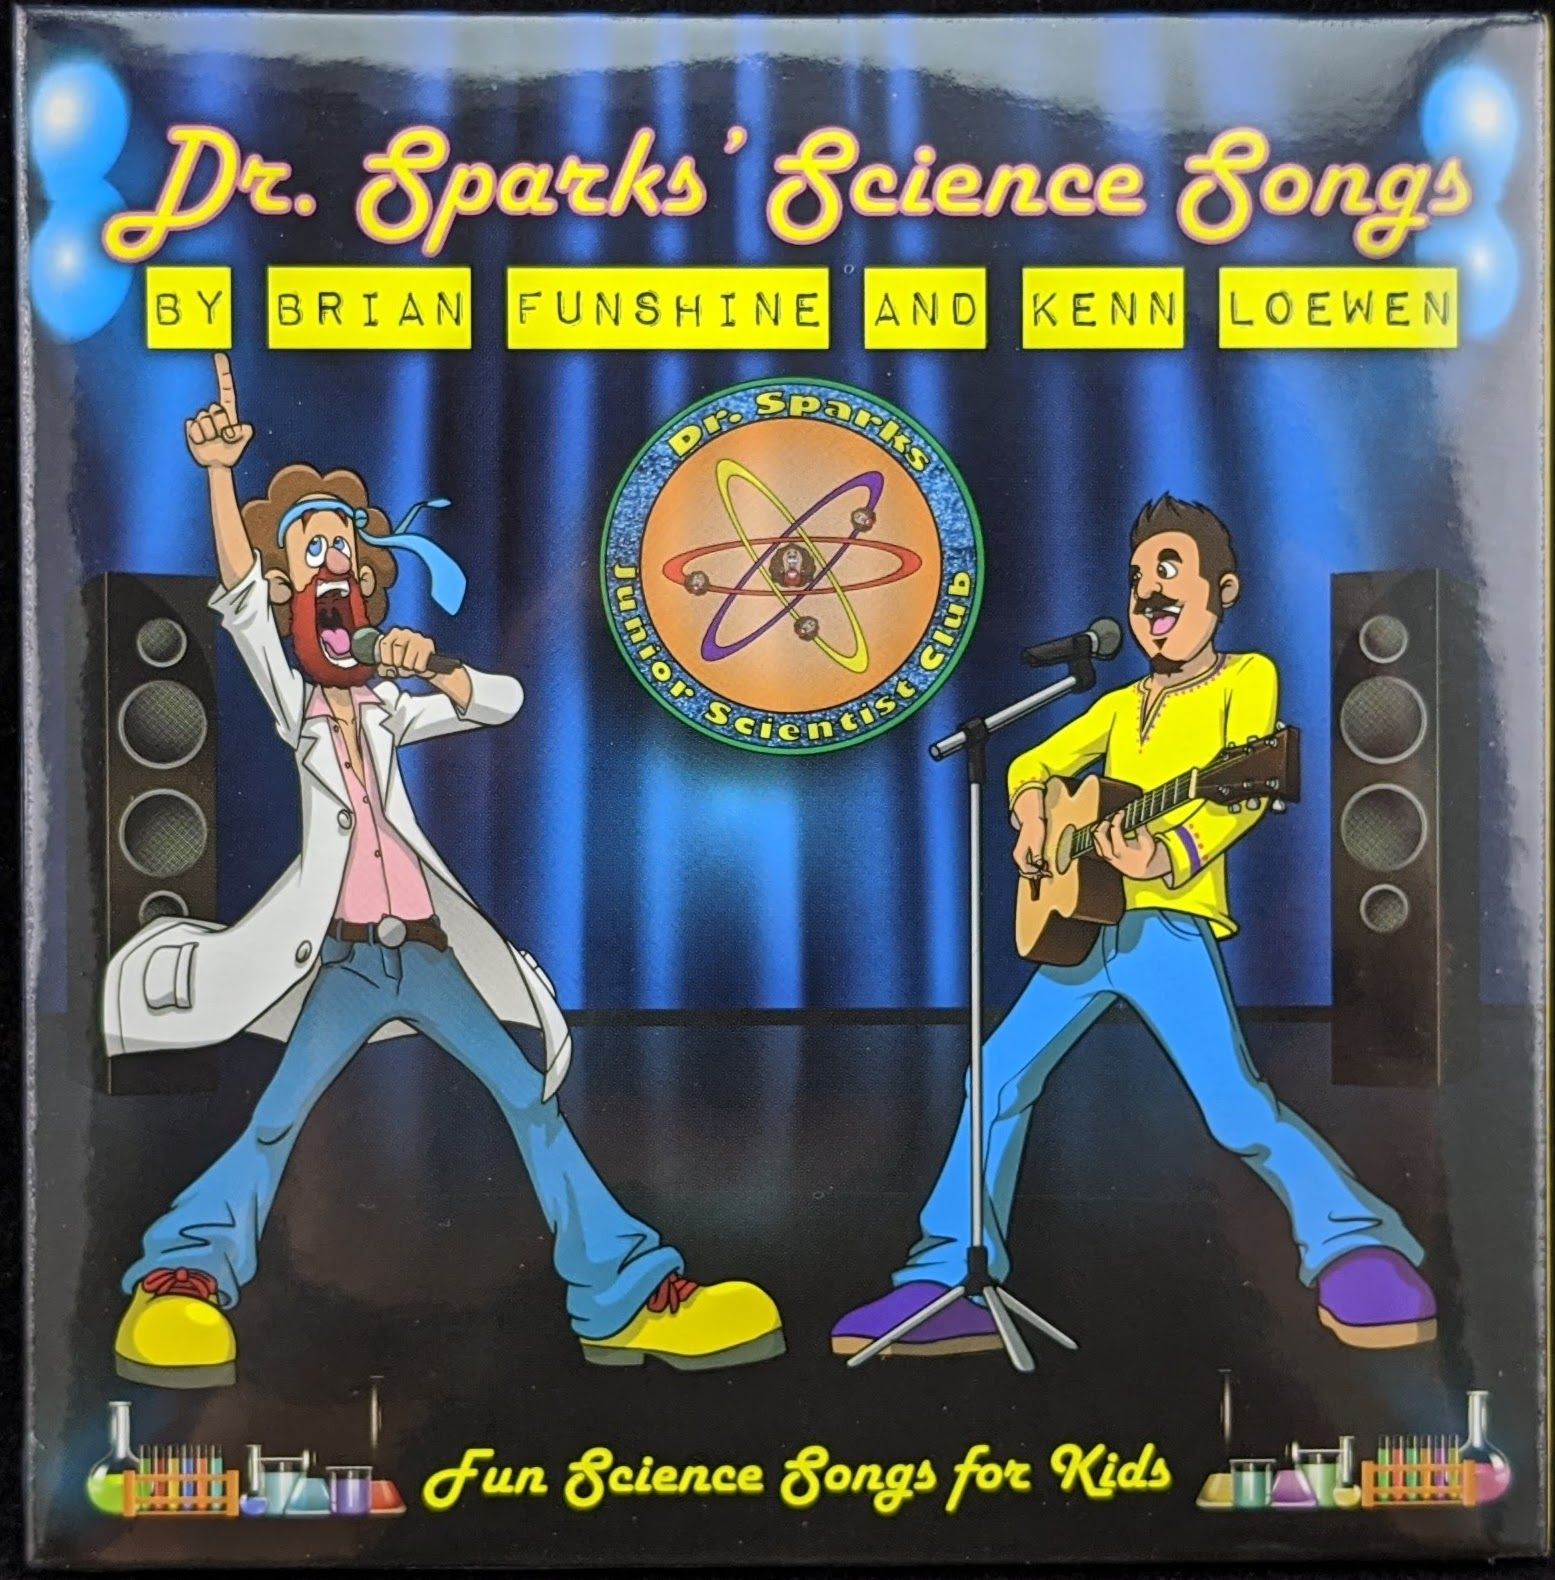 Dr. Sparks Science Songs